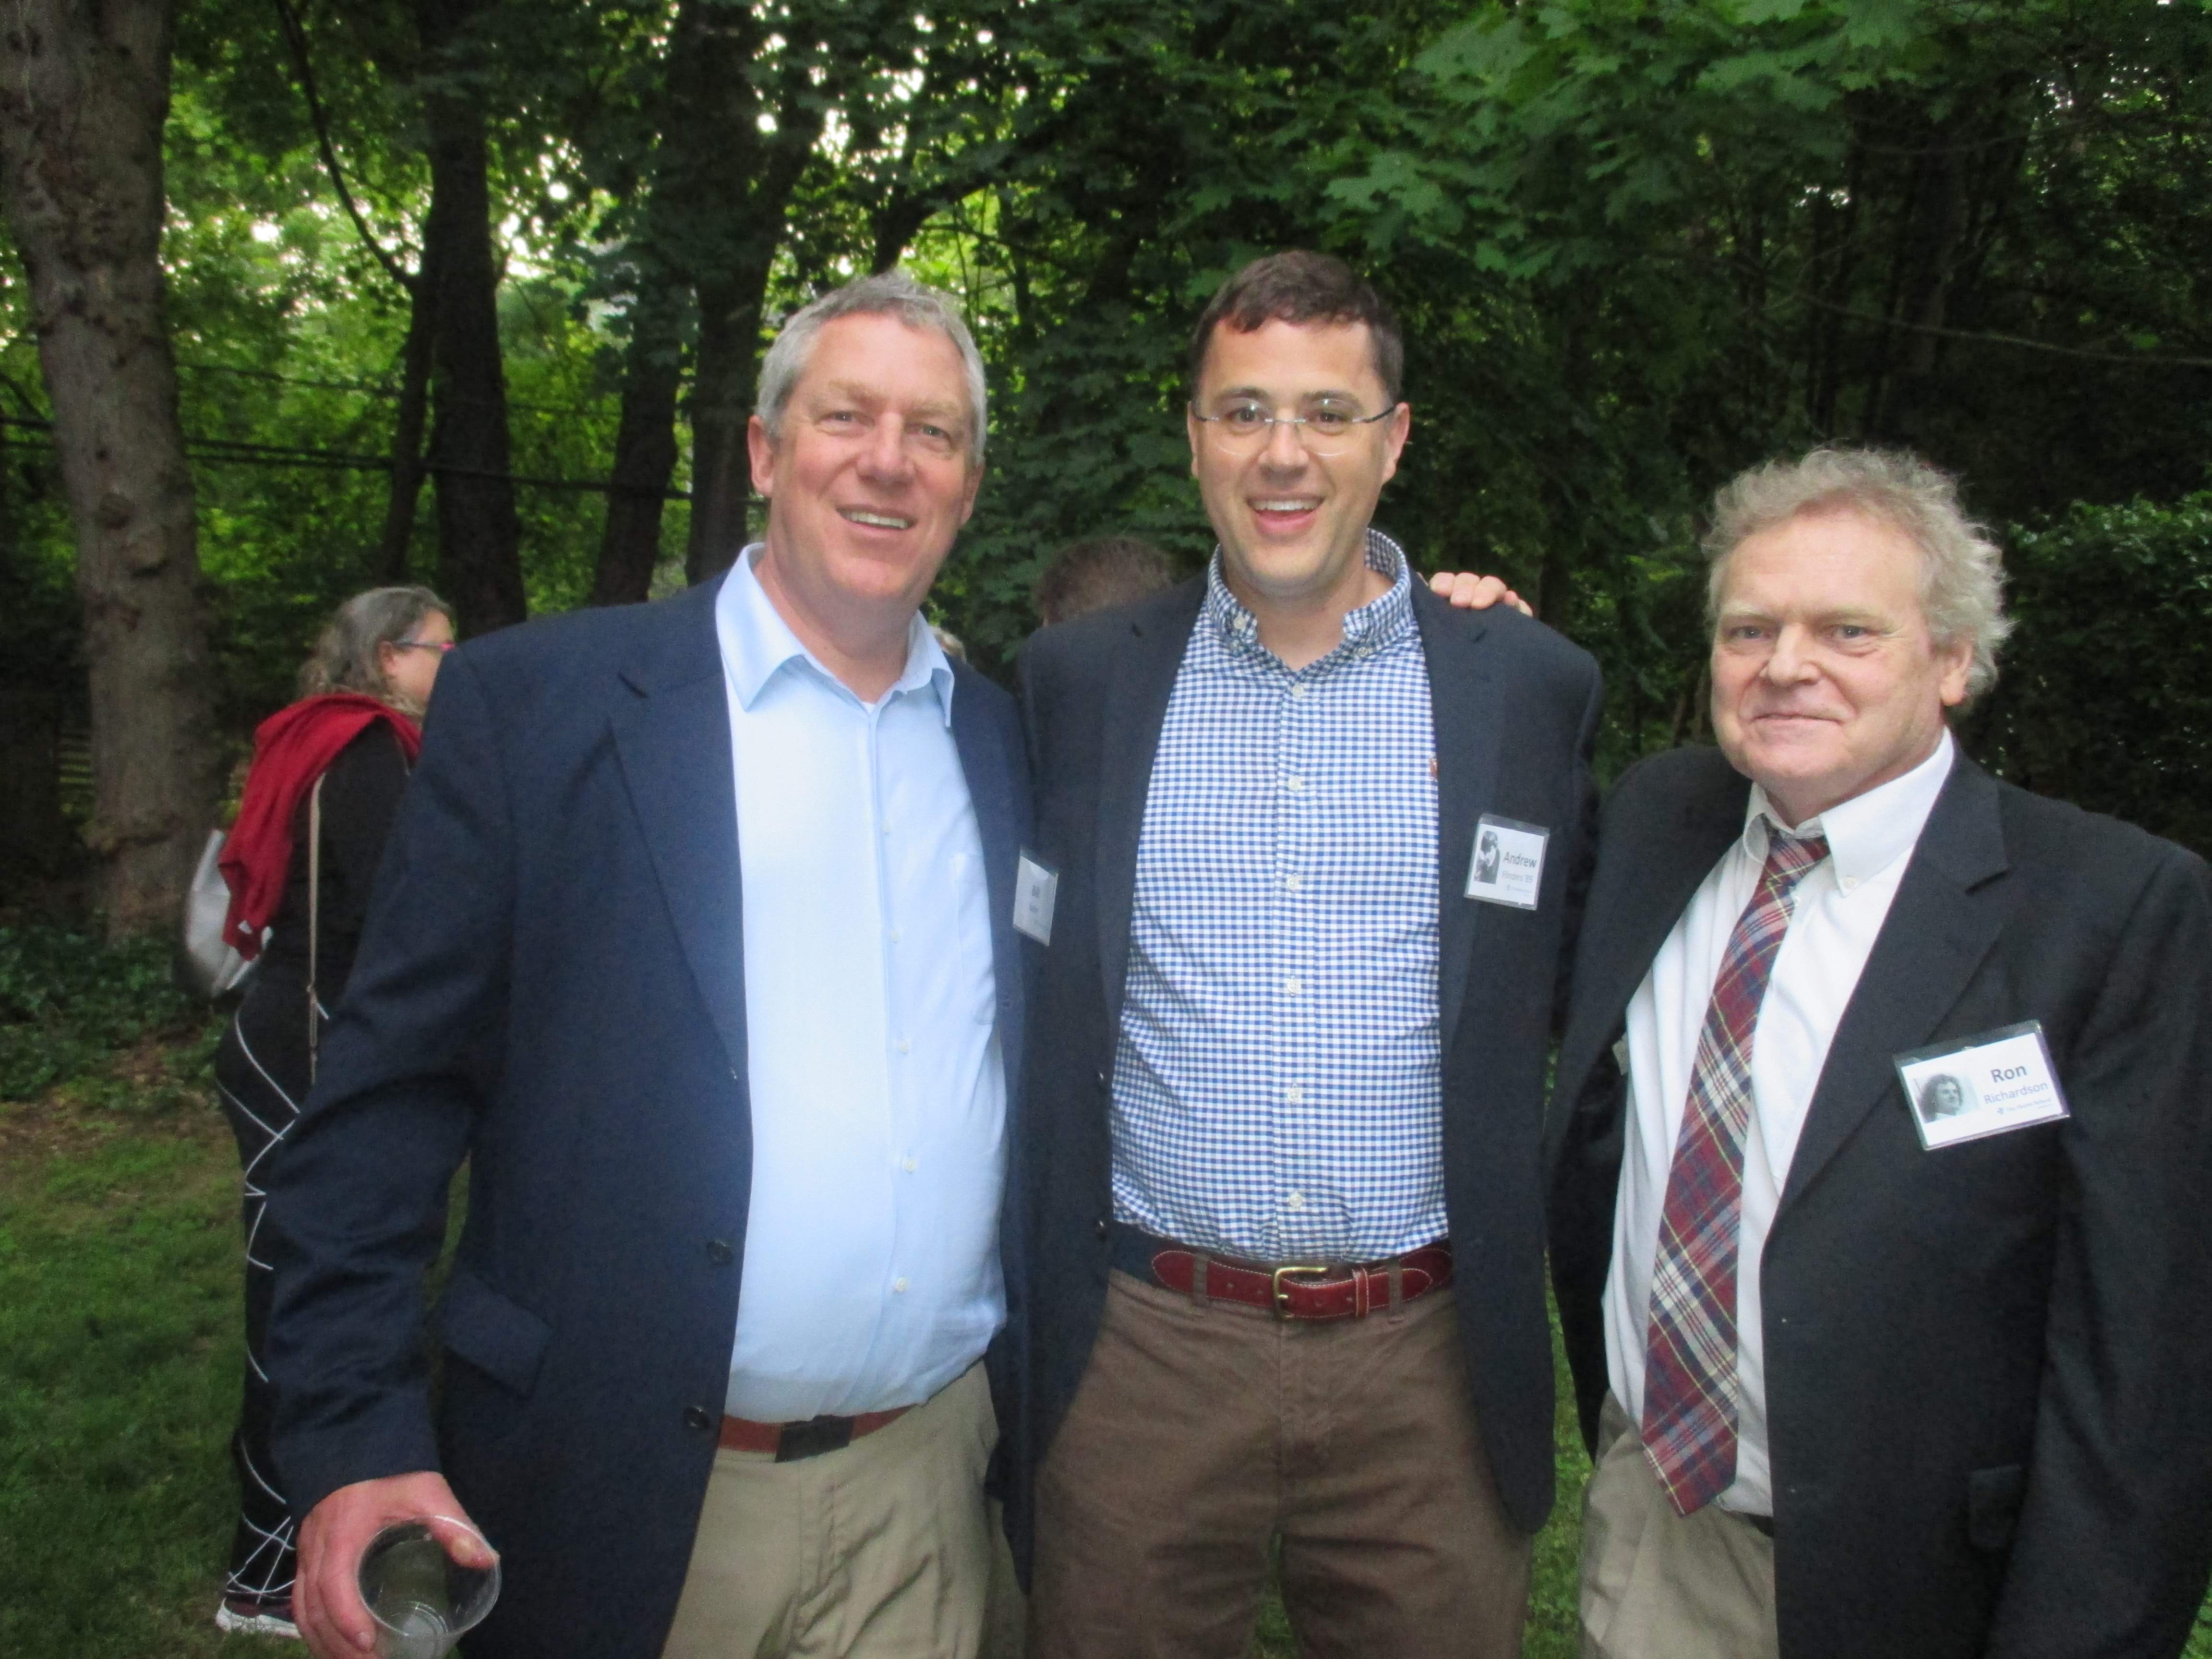 Bill Baker, Andrew Flinders '89, and former faculty Ron Richardson